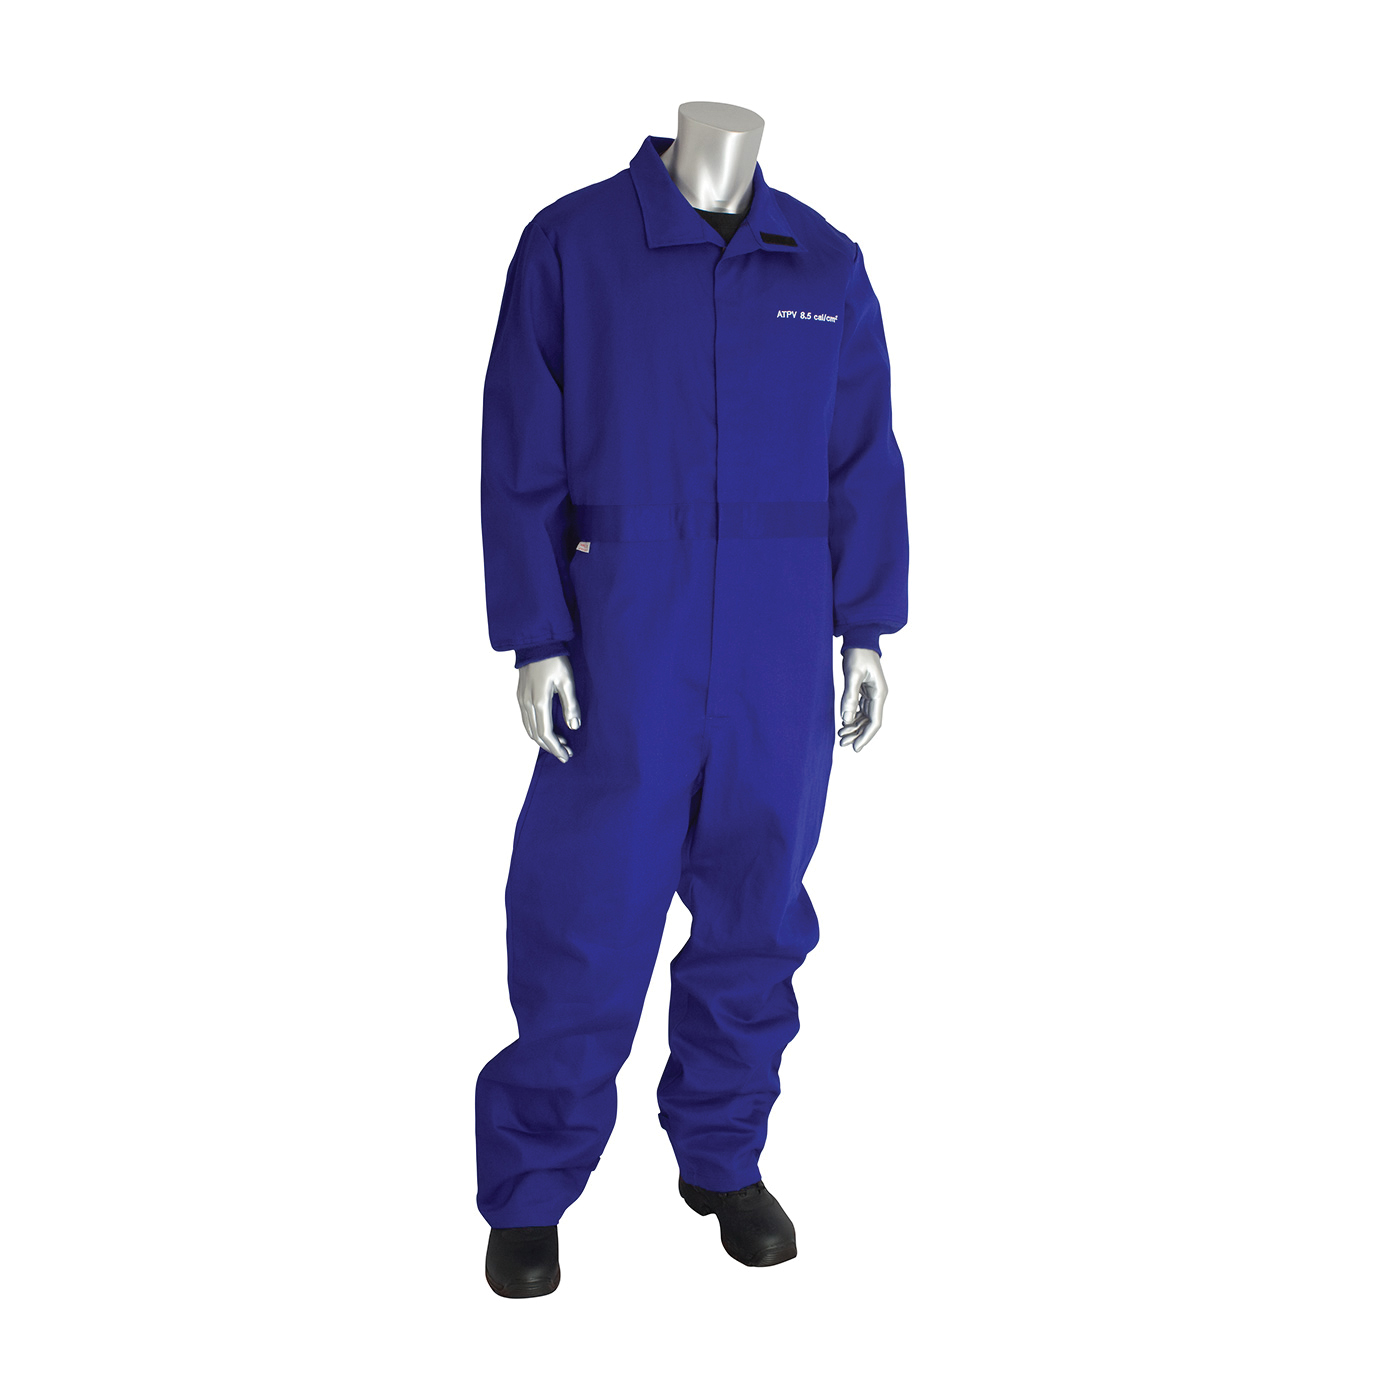 PIP® 9100-2120D/L Flame Resistant Coverall With Vented Back, L, Royal Blue, 90% Cotton/10% Nylon/FR Twill Weave, 44 to 46 in Chest, 32 in L Inseam